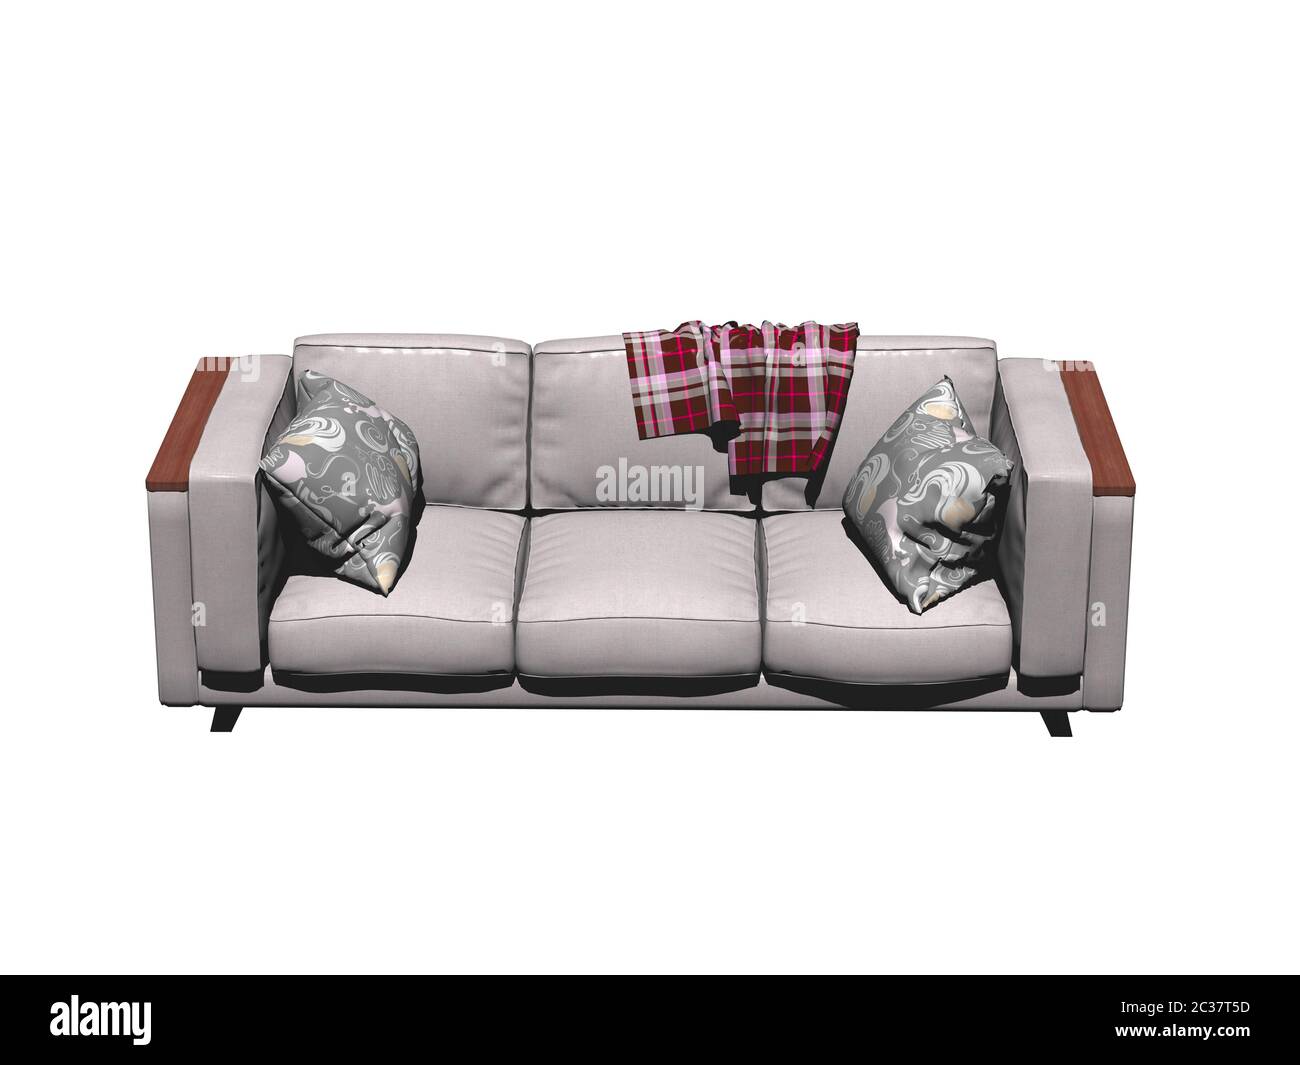 Sofa with pillows and blanket in the living room Stock Photo